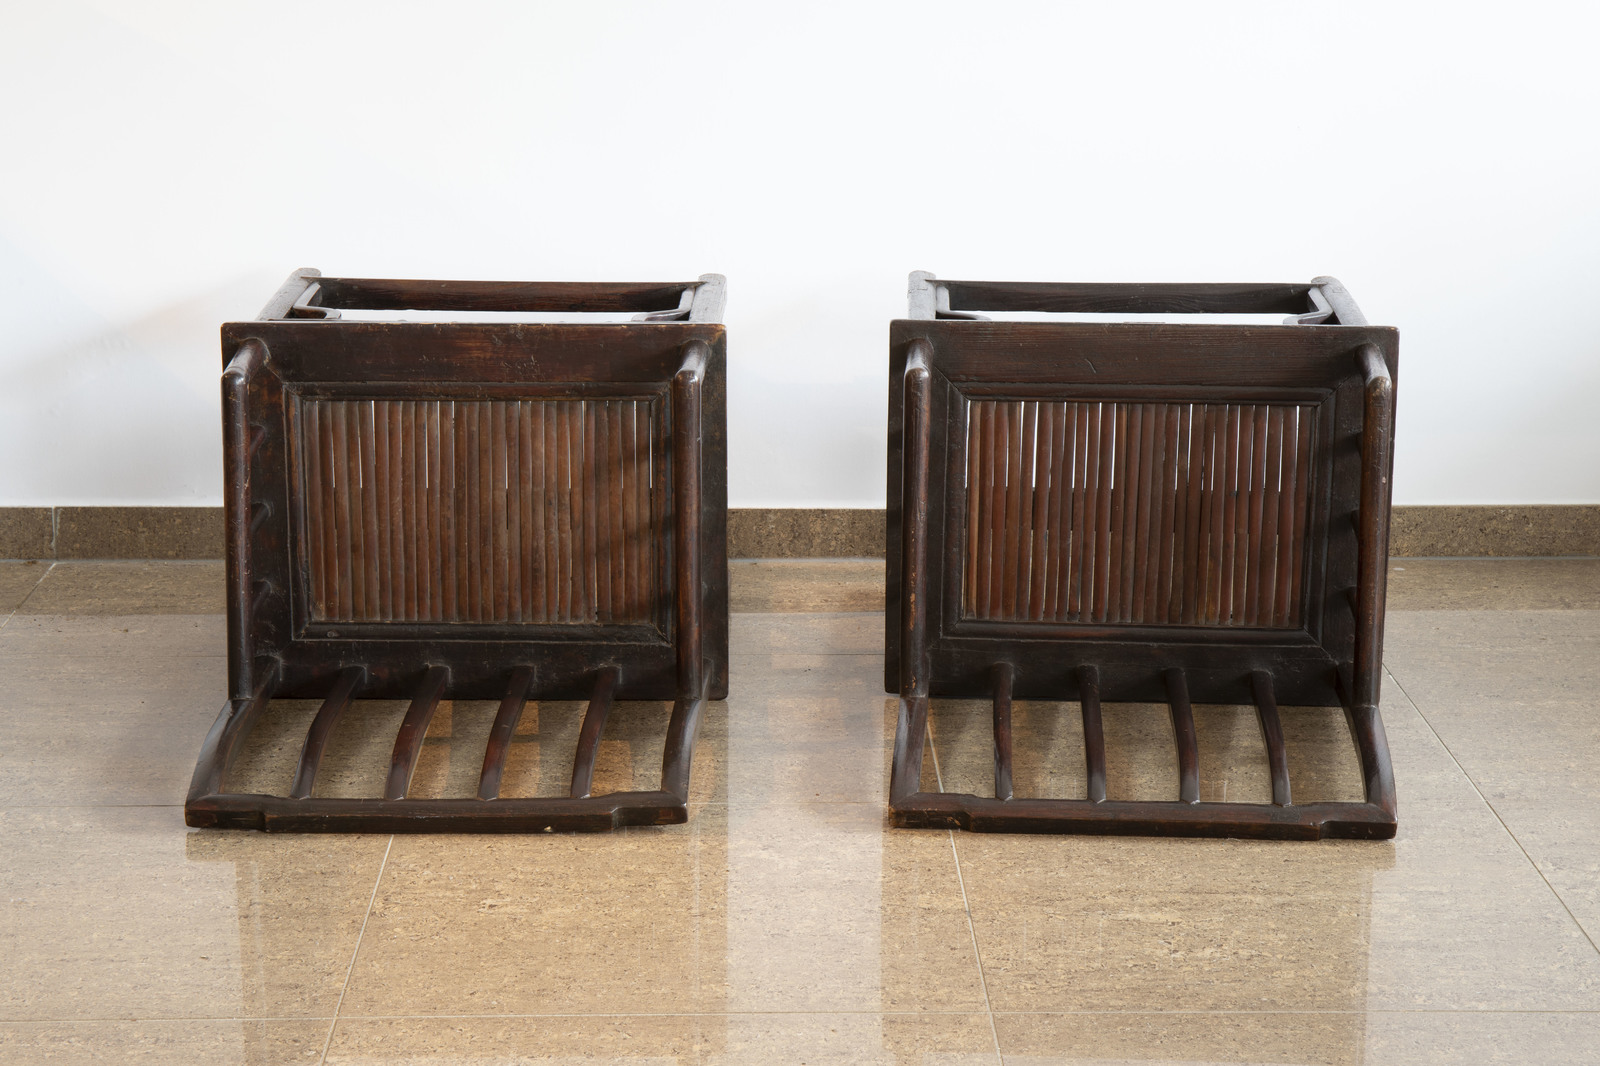 A pair of Chinese lacquered wooden chairs, first half of the 20th C. - Image 6 of 7